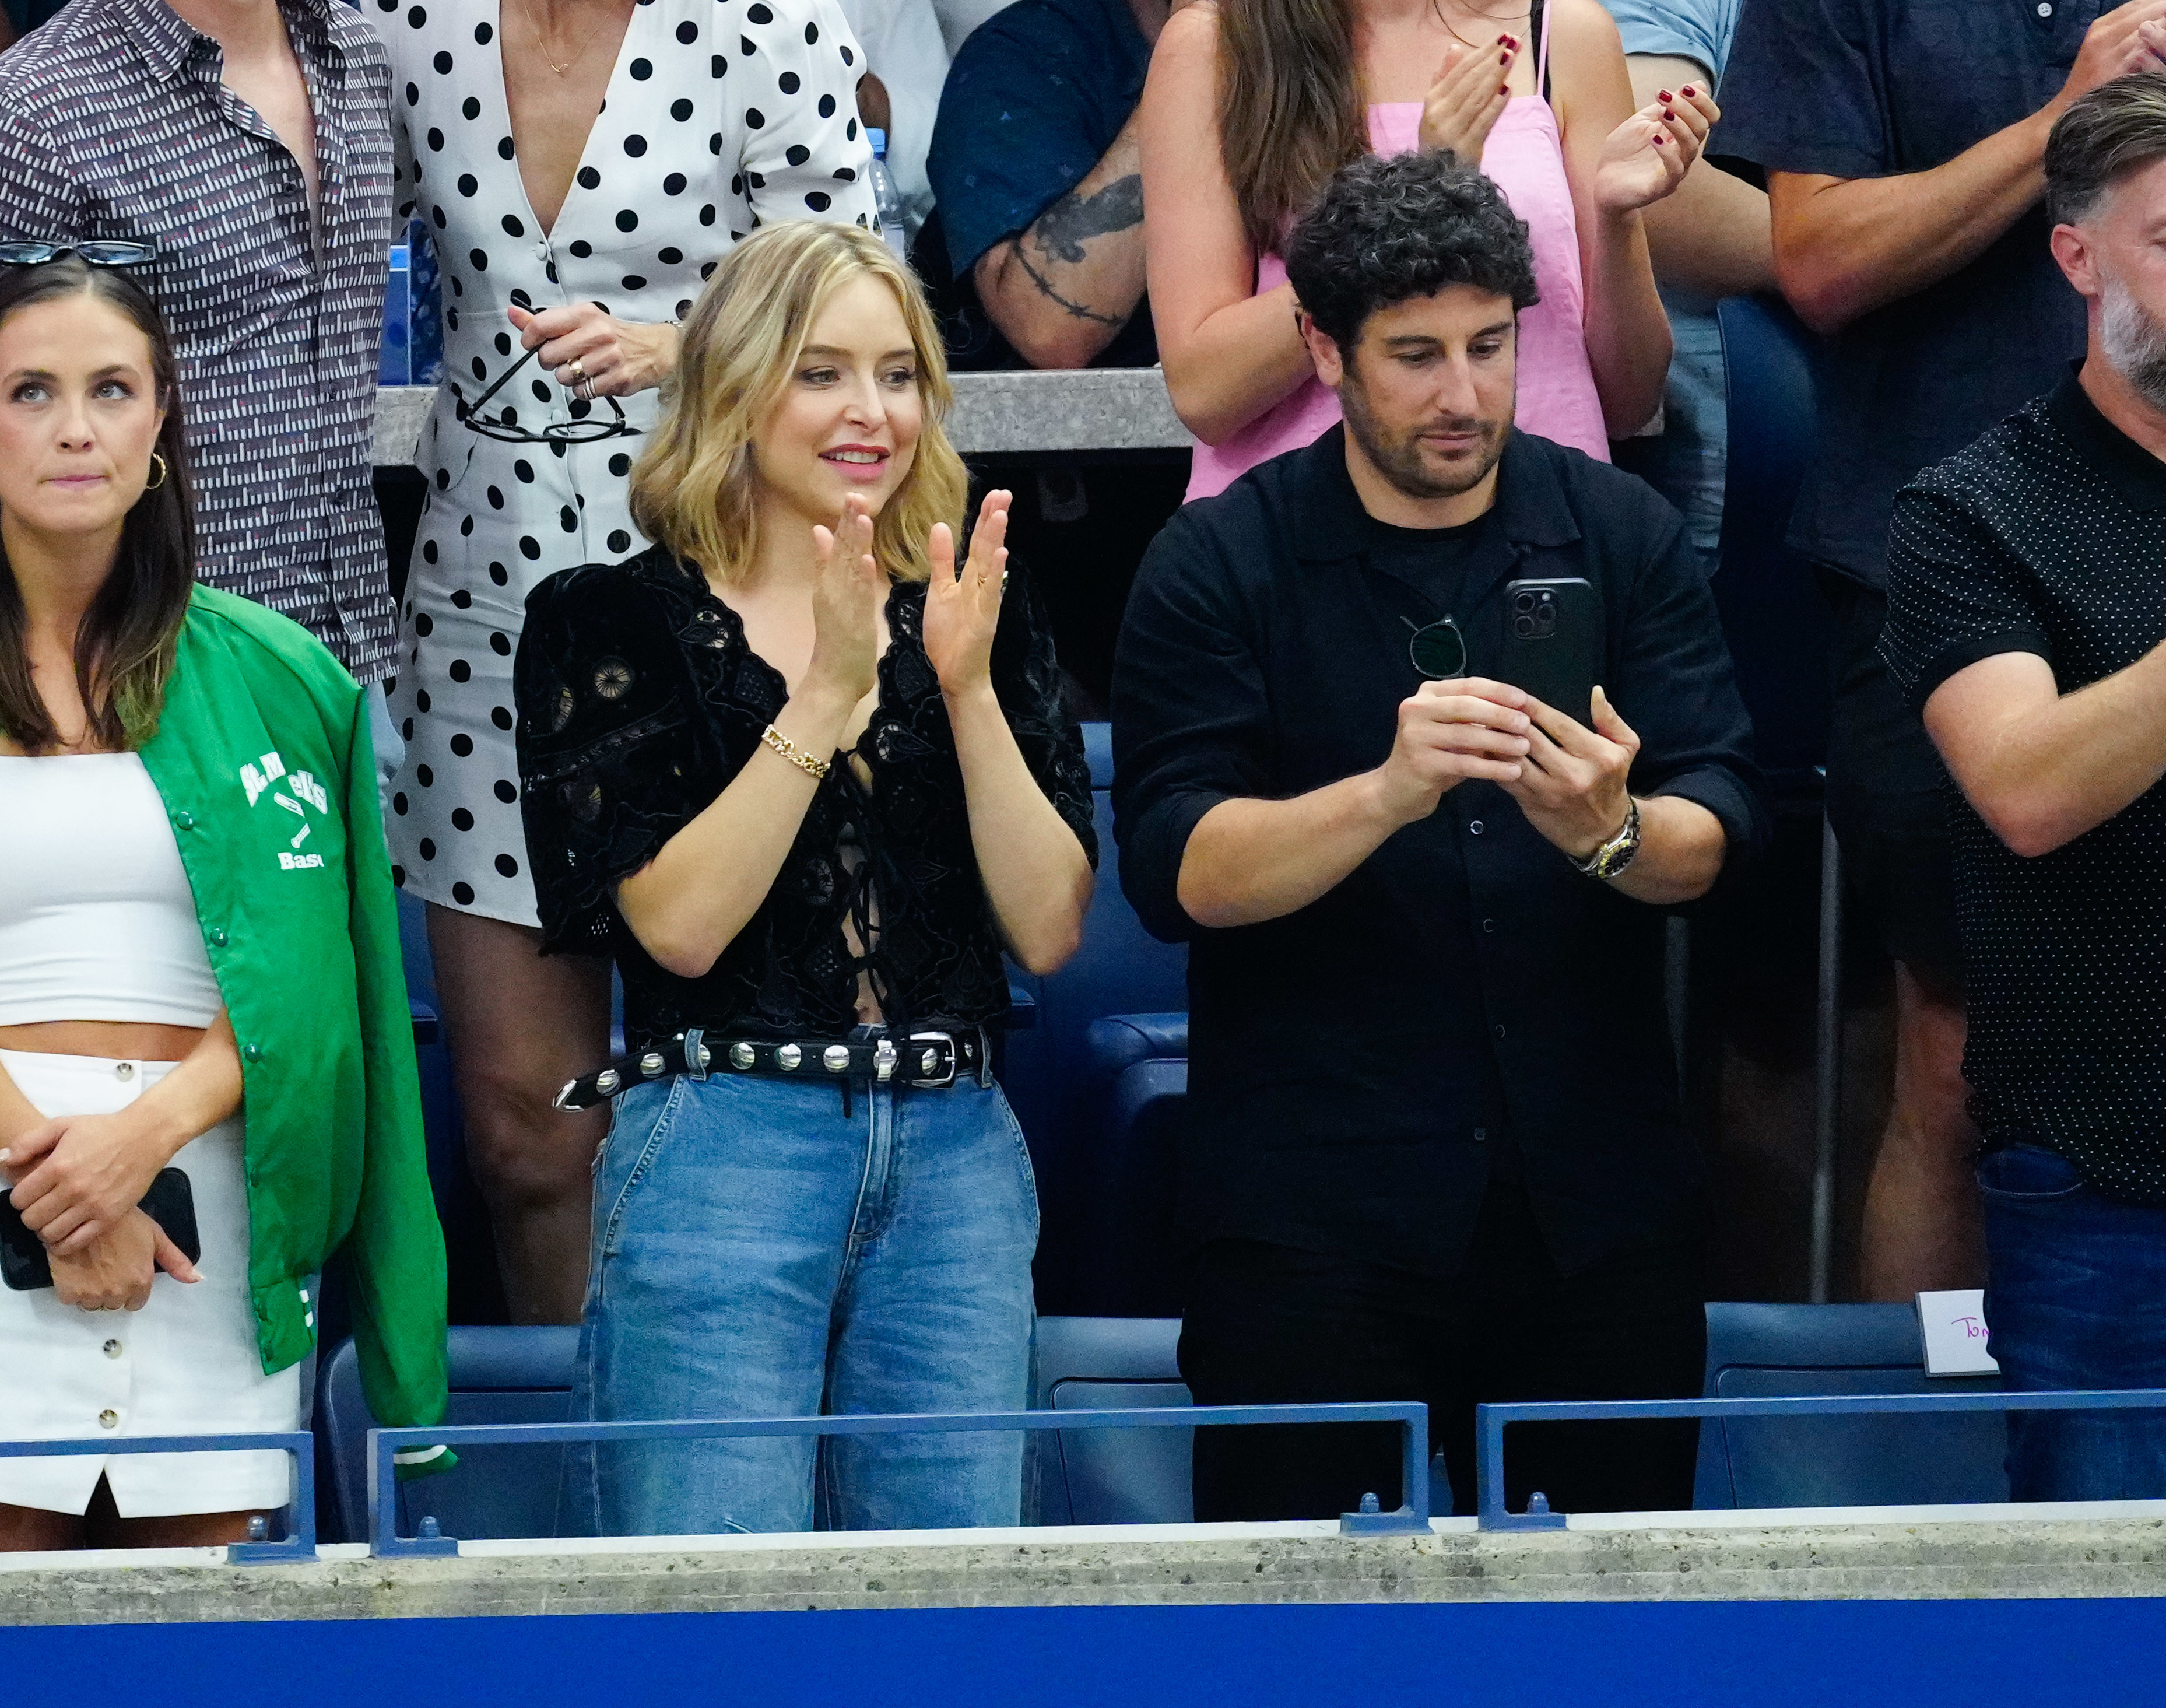 Jason Biggs takes a picture of the players as he and Jenny Mollen stand